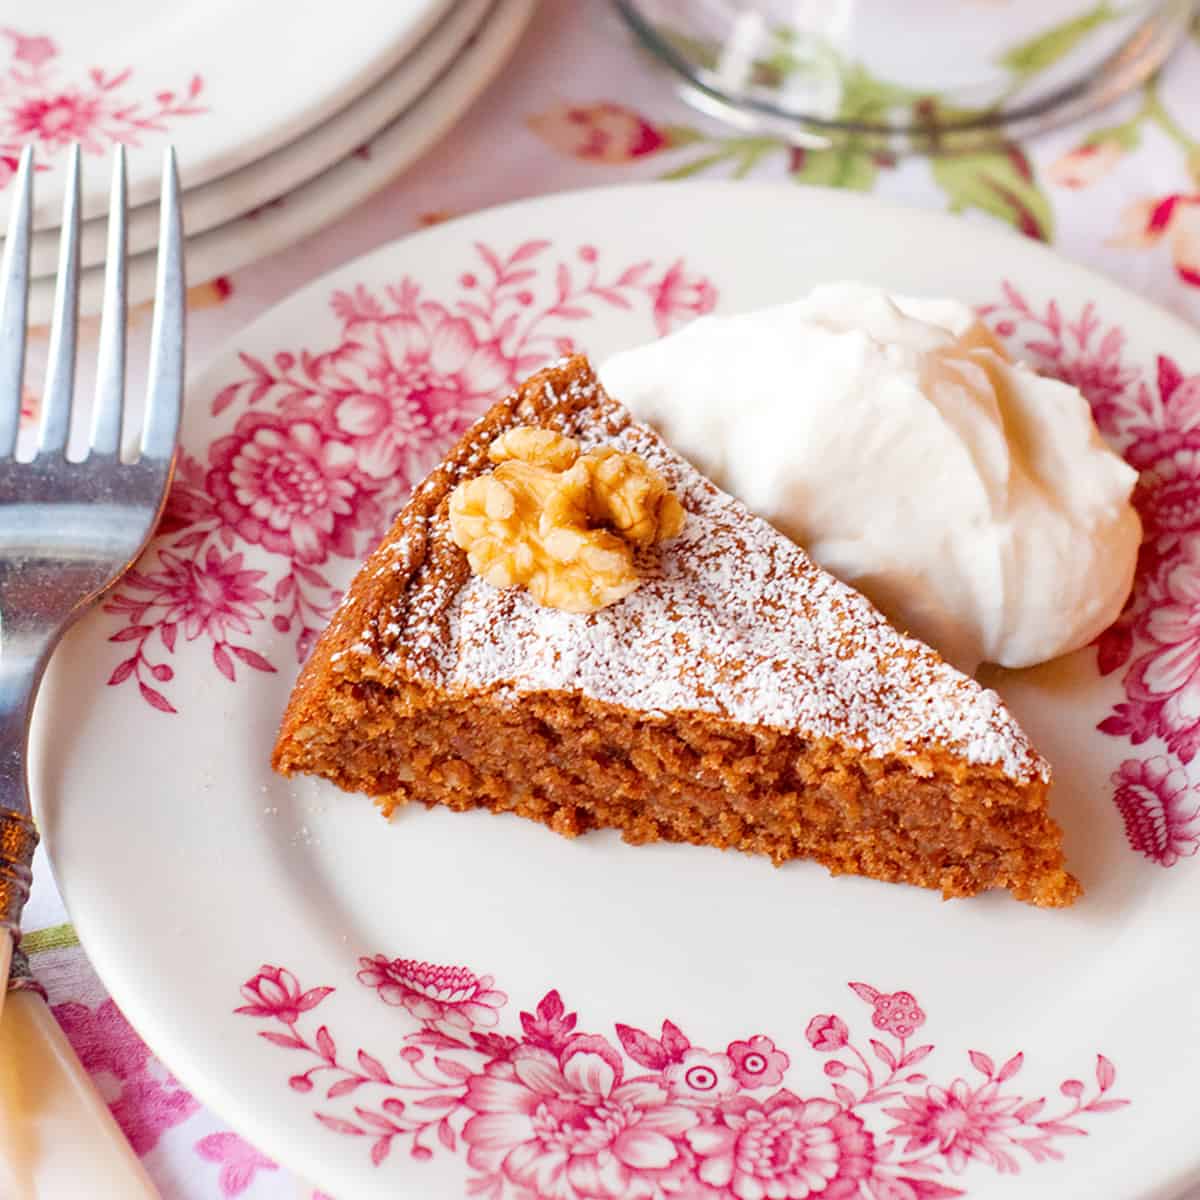 A slice of flourless walnut cake on a serving plate.